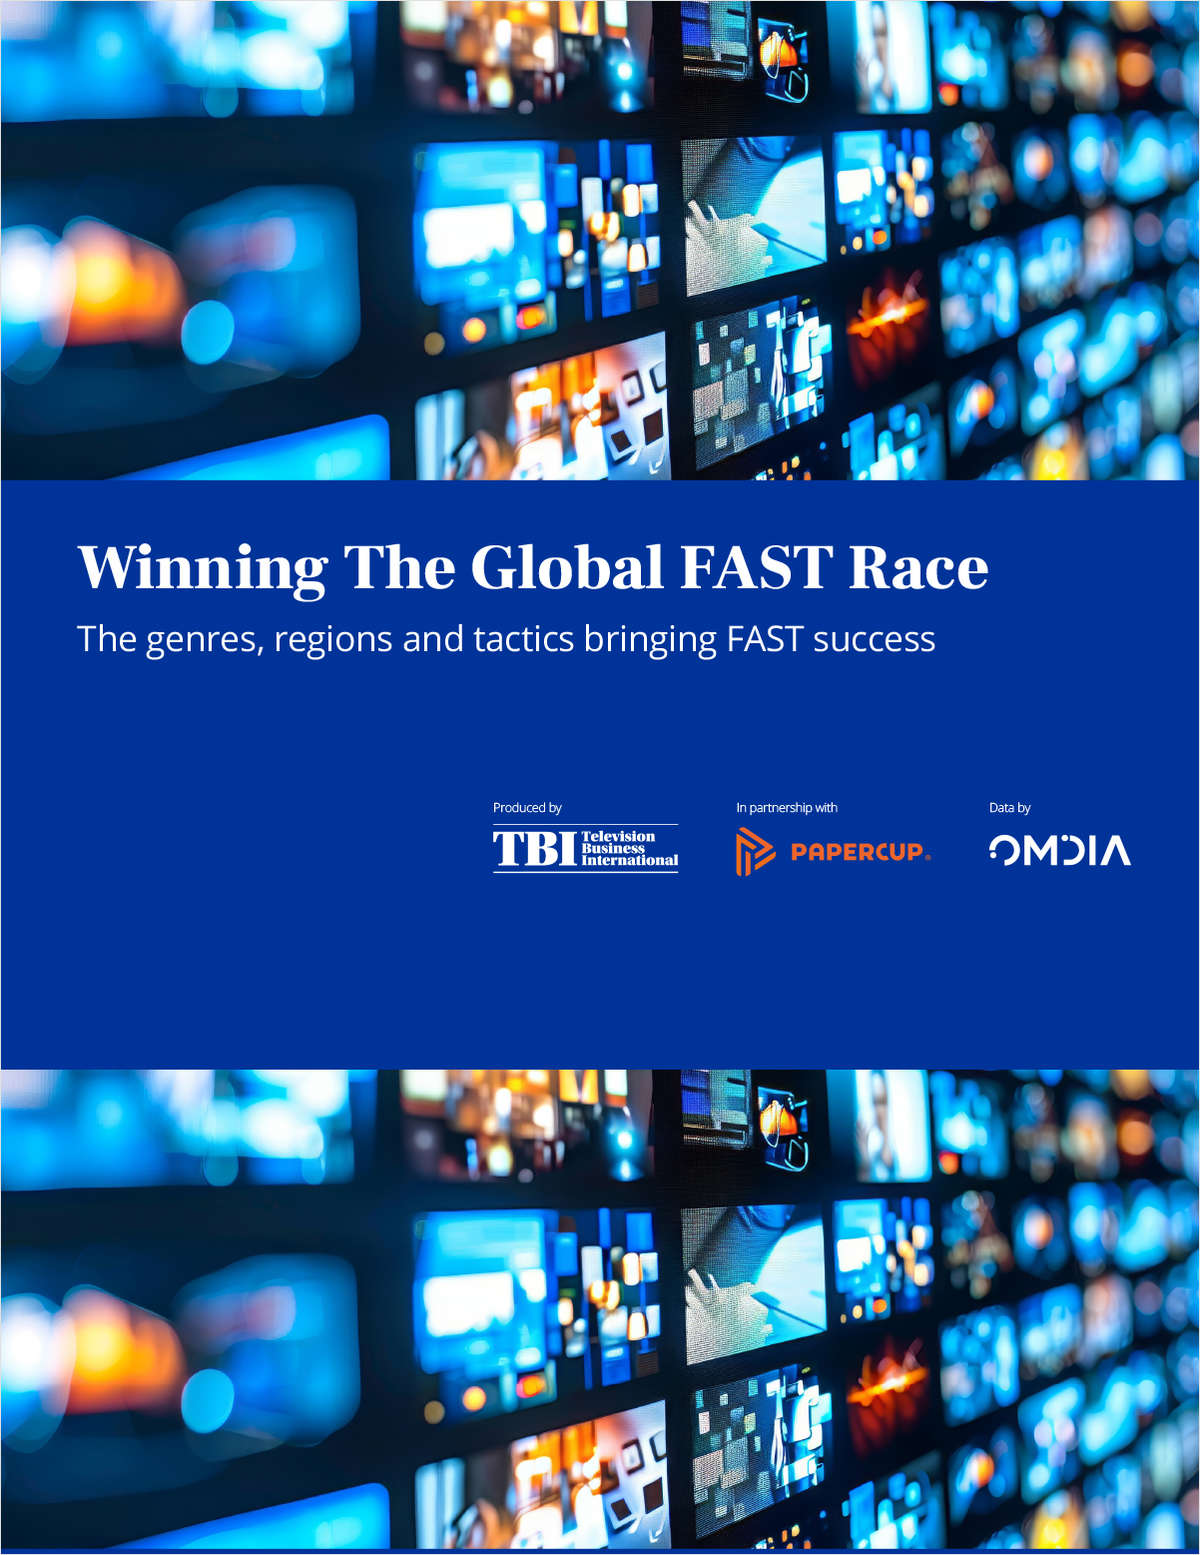 Winning the global FAST race - The genres, regions, and tactics bringing FAST success